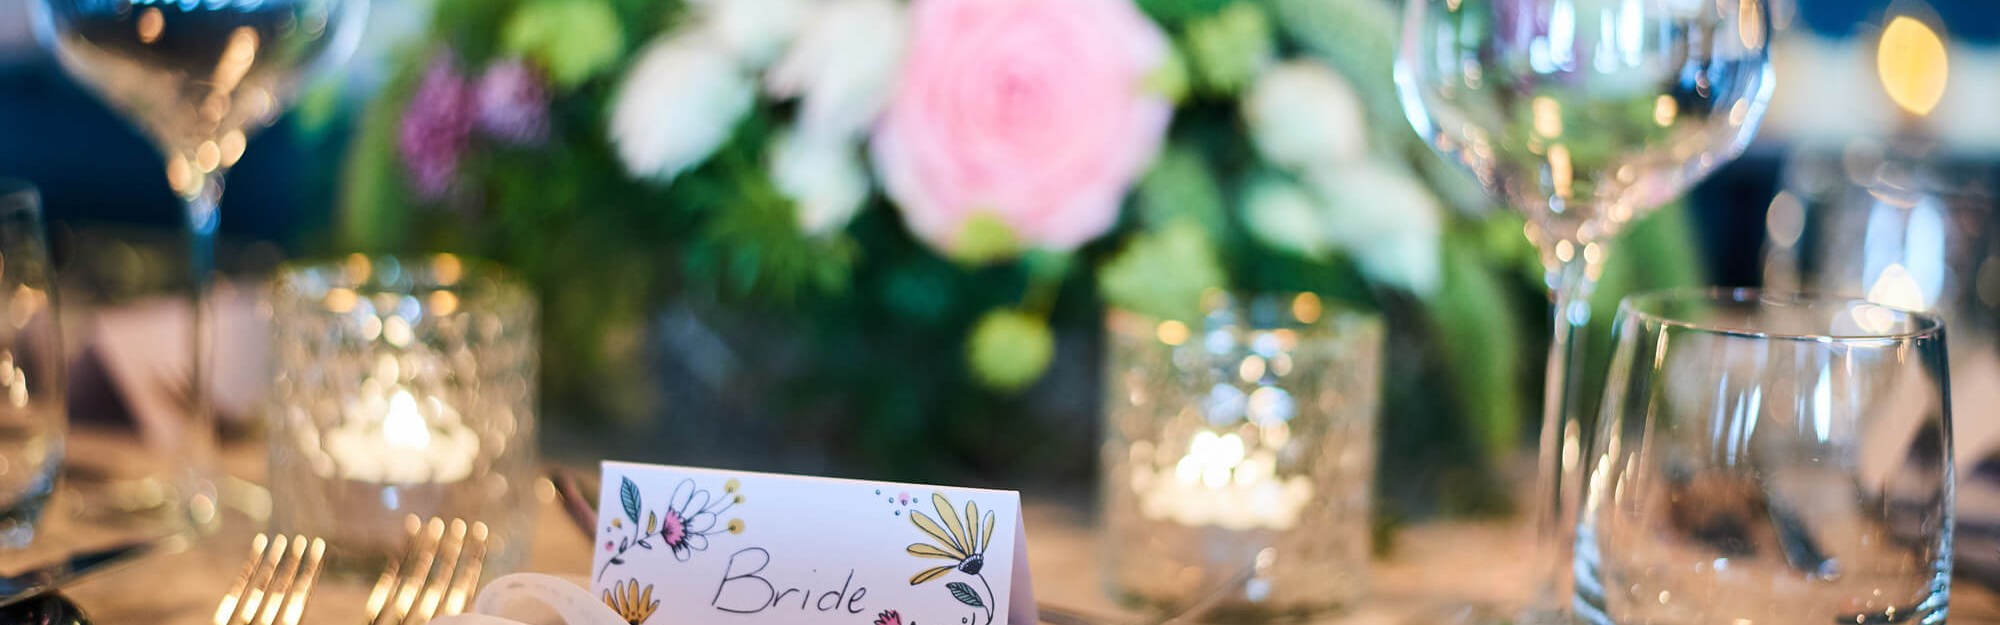 Bride placeholder on table set for wedding breakfast with flowers